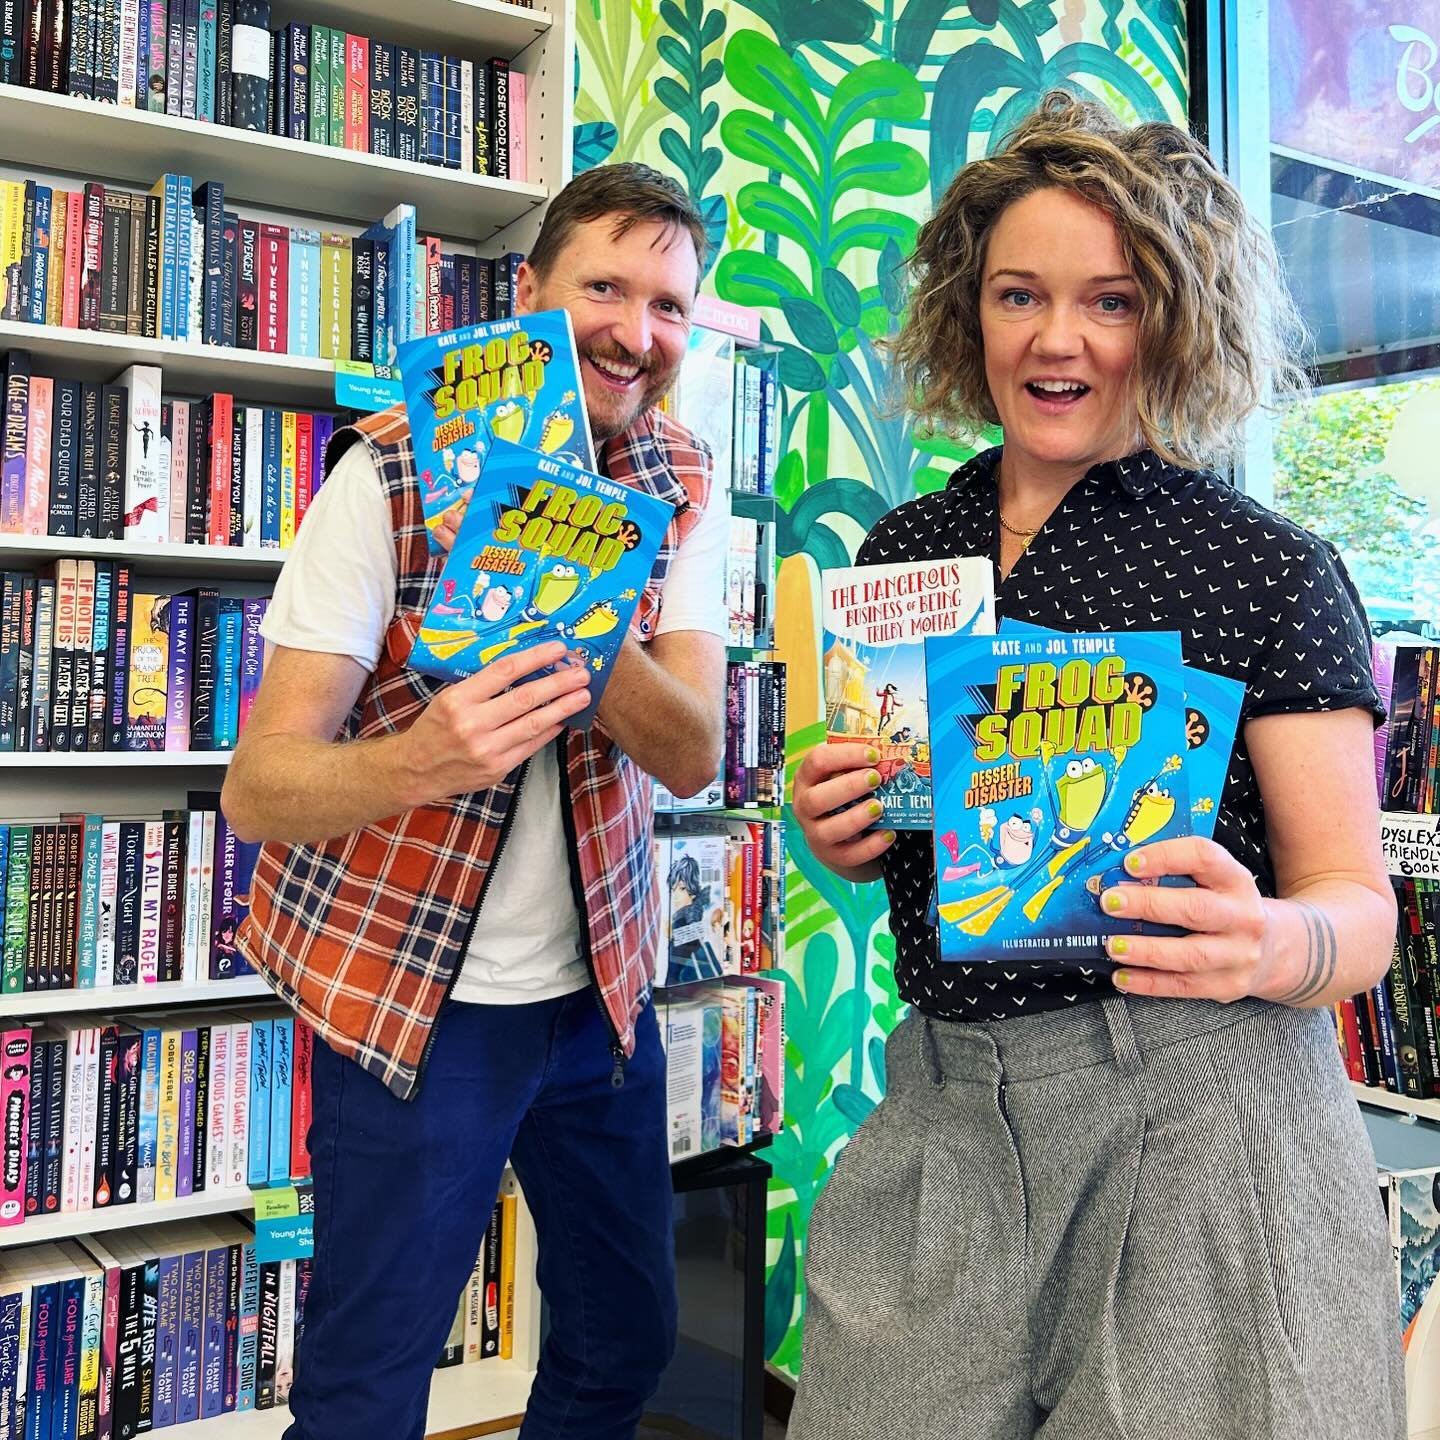 Melbourne, we&rsquo;re here! We just got in this morning and popped into some of our favourite bookshops. @readingskids and @avenuebookstore now have stacks of signed books. Right now we have a little presentation polishing to do&hellip; it&rsquo;s j